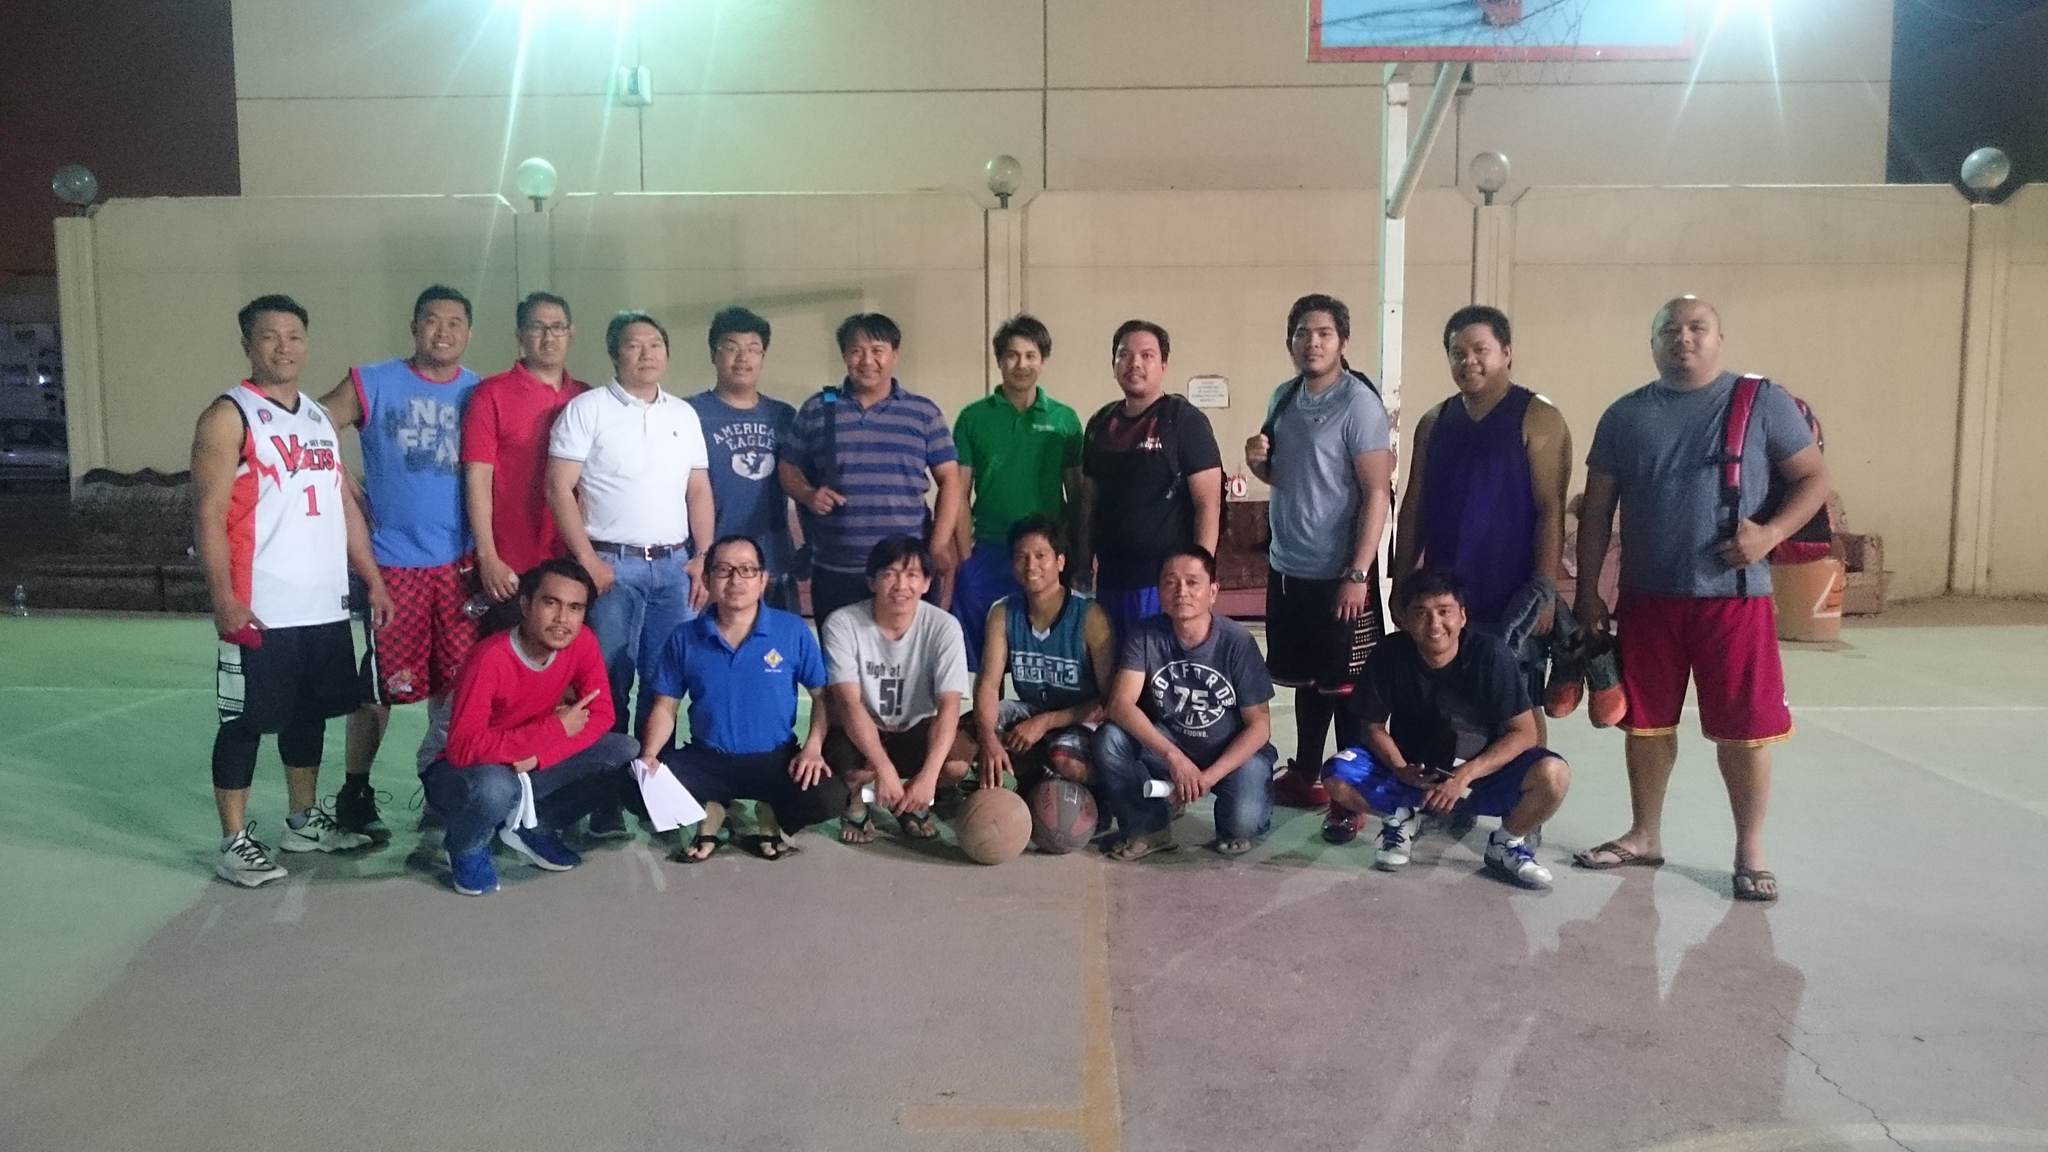 2nd BASKETBALL – TRY-OUT FOR PHILIPPINE PROFESSIONAL BASKETBALL TOURNAMENT 2018